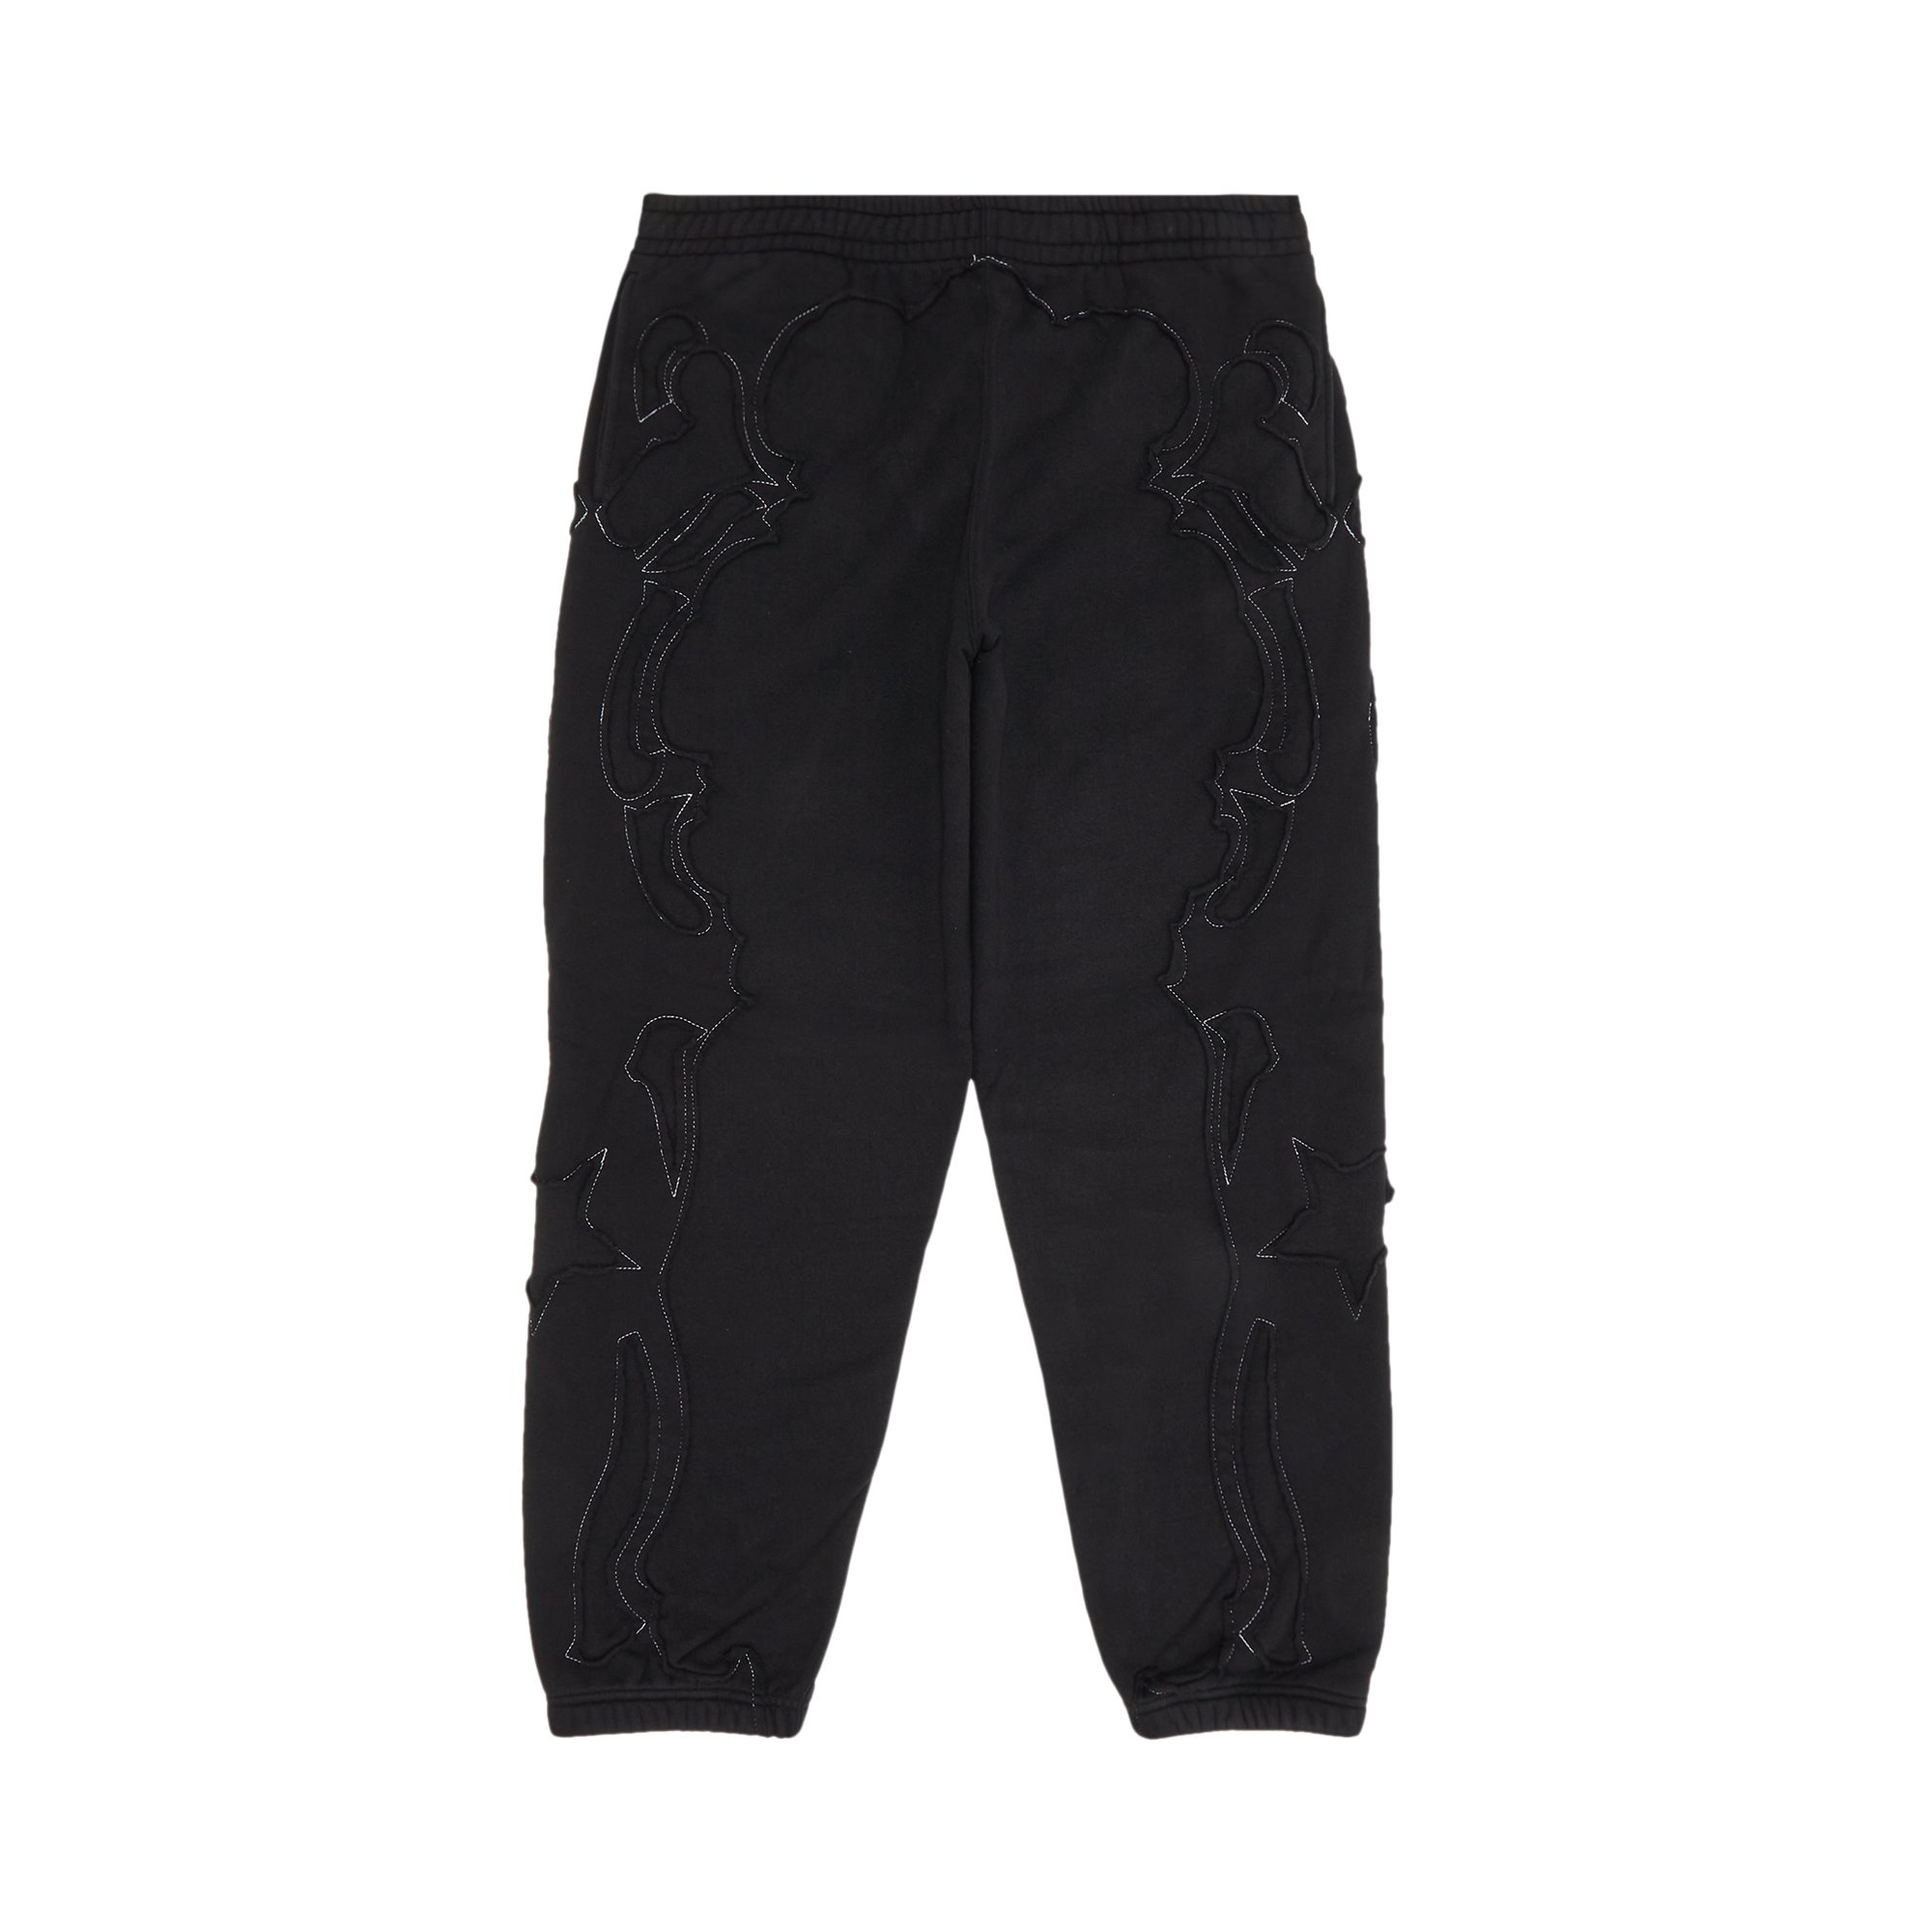 Western Cut Out Hooded SweatPants